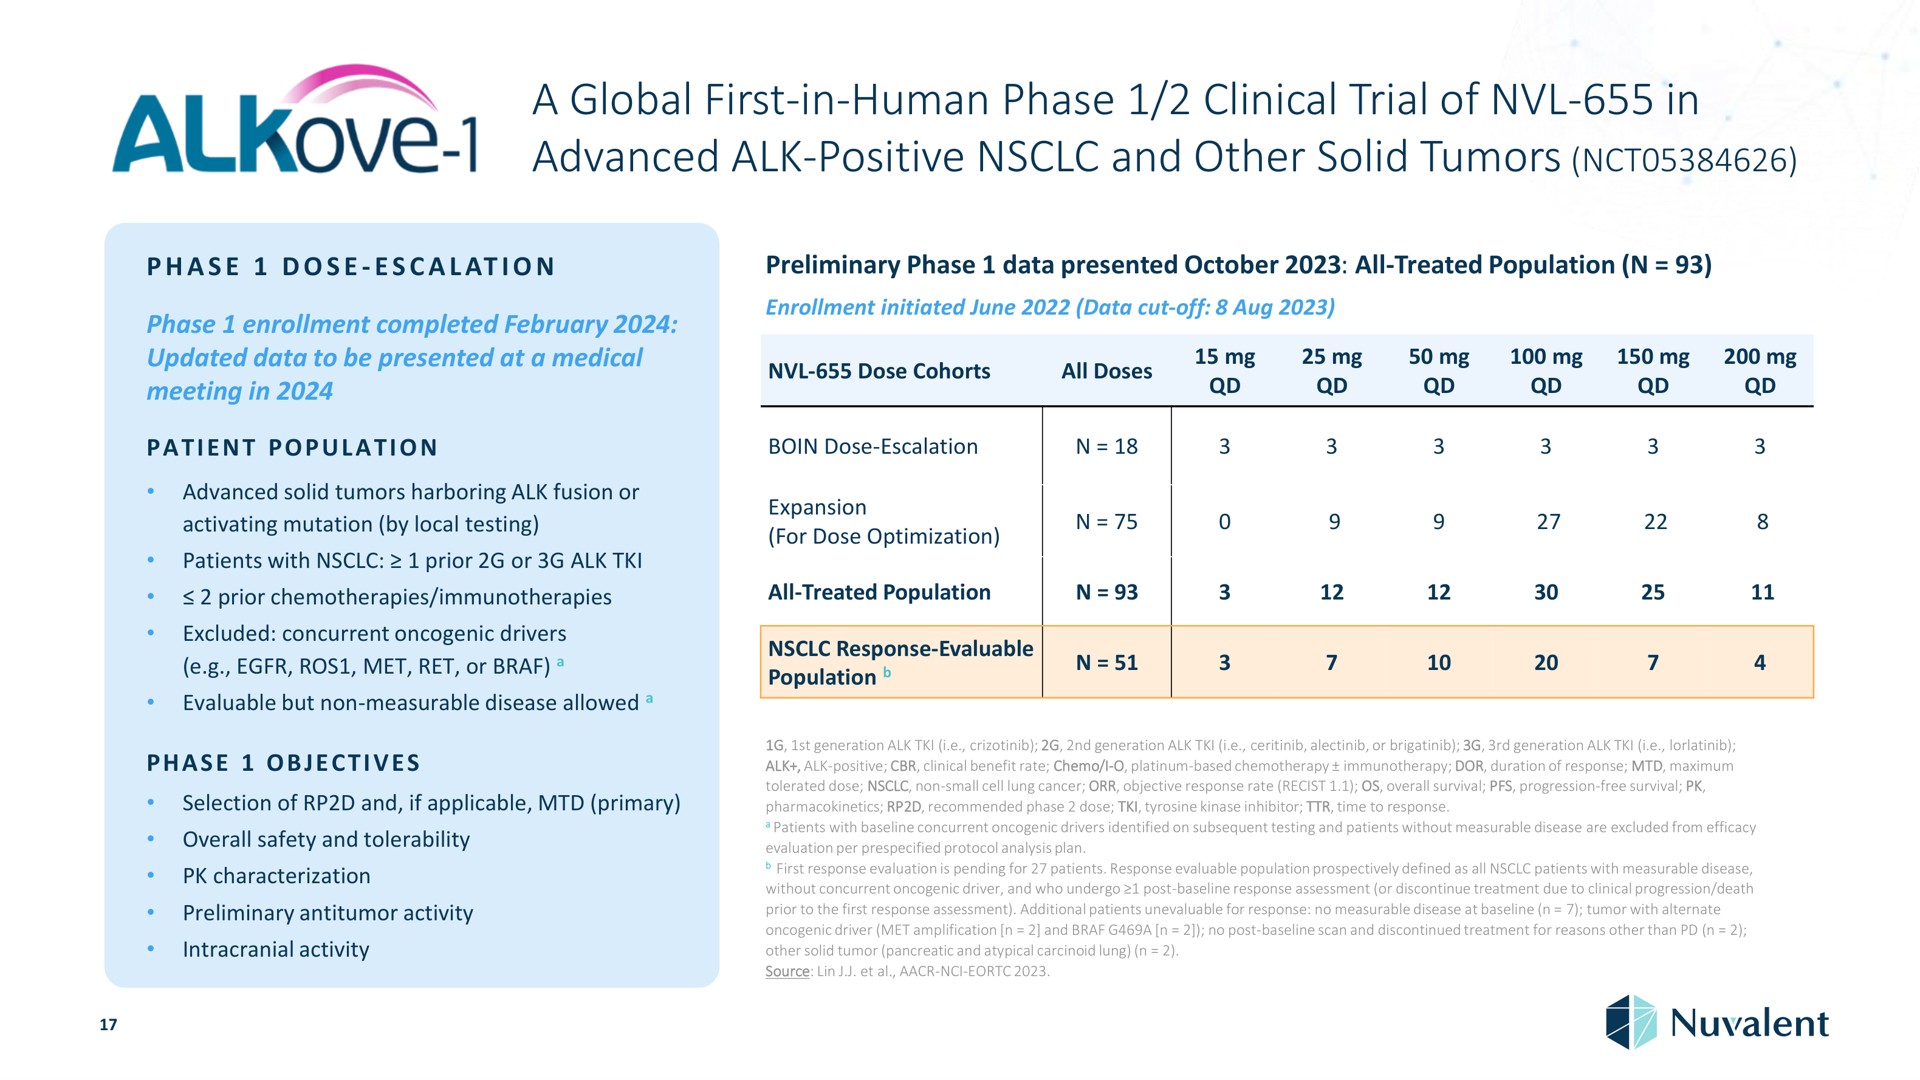 a global first in human phase clinical trial of in advanced alk positive and other solid tumors dose preliminary data presented all treated population enrollment completed updated data to be presented at medical meeting enrollment initiated june data cut off dose cohorts all doses patient population dose harboring alk fusion or activating mutation by local testing patients with prior or alk for dose optimization prior chemotherapies all treated population excluded concurrent drivers met ret or evaluable but non measurable disease allowed response evaluable population objectives selection if applicable primary overall safety tolerability characterization preliminary activity intracranial activity non small cell with cor evaluation per i platinum base dor duration response maximum cancer objective rate overall survival on free survival dose tyrosine kinase drivers identified on subsequent testing patients without measurable disease are excluded from efficacy time to response inhibitor without prior to the first response for response no measurable disease at tumor with driver met amplification no post scan discontinued treatment for reasons than tumor pancreatic atypical carcinoid lung source lin | Nuvalent